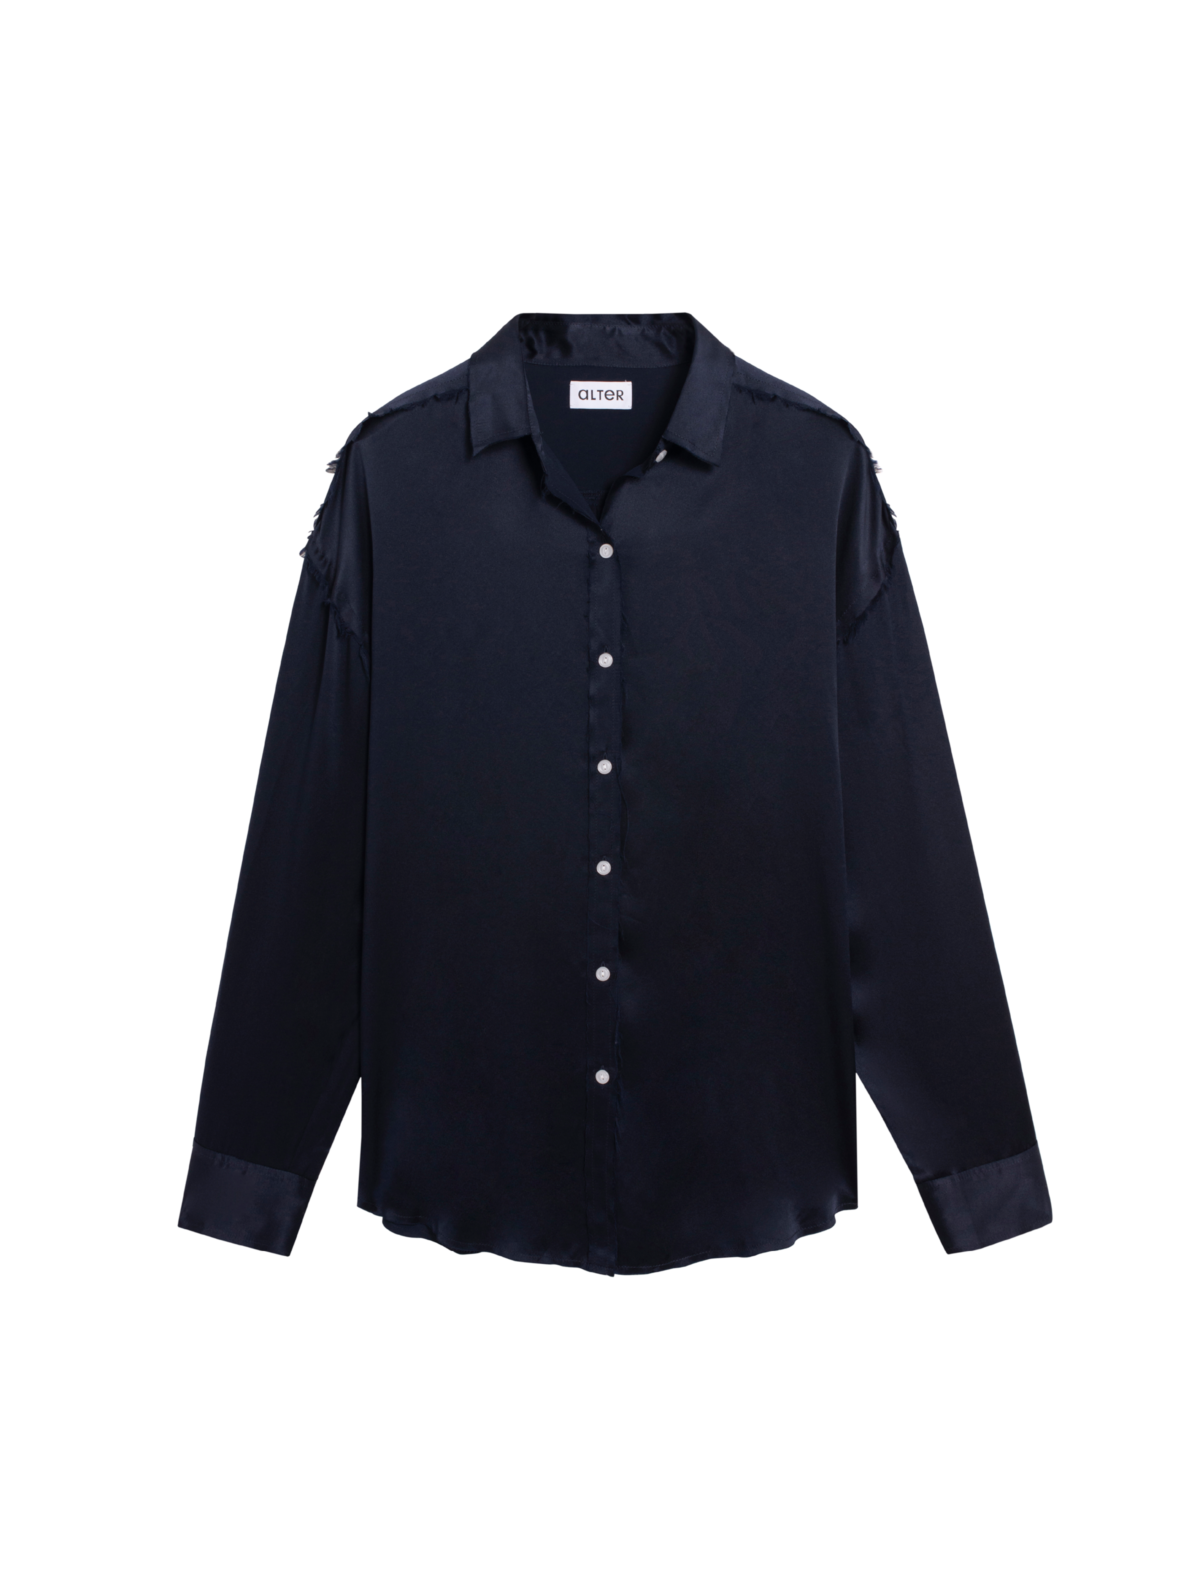 Alter Designs Satin Shirt in Navy.png